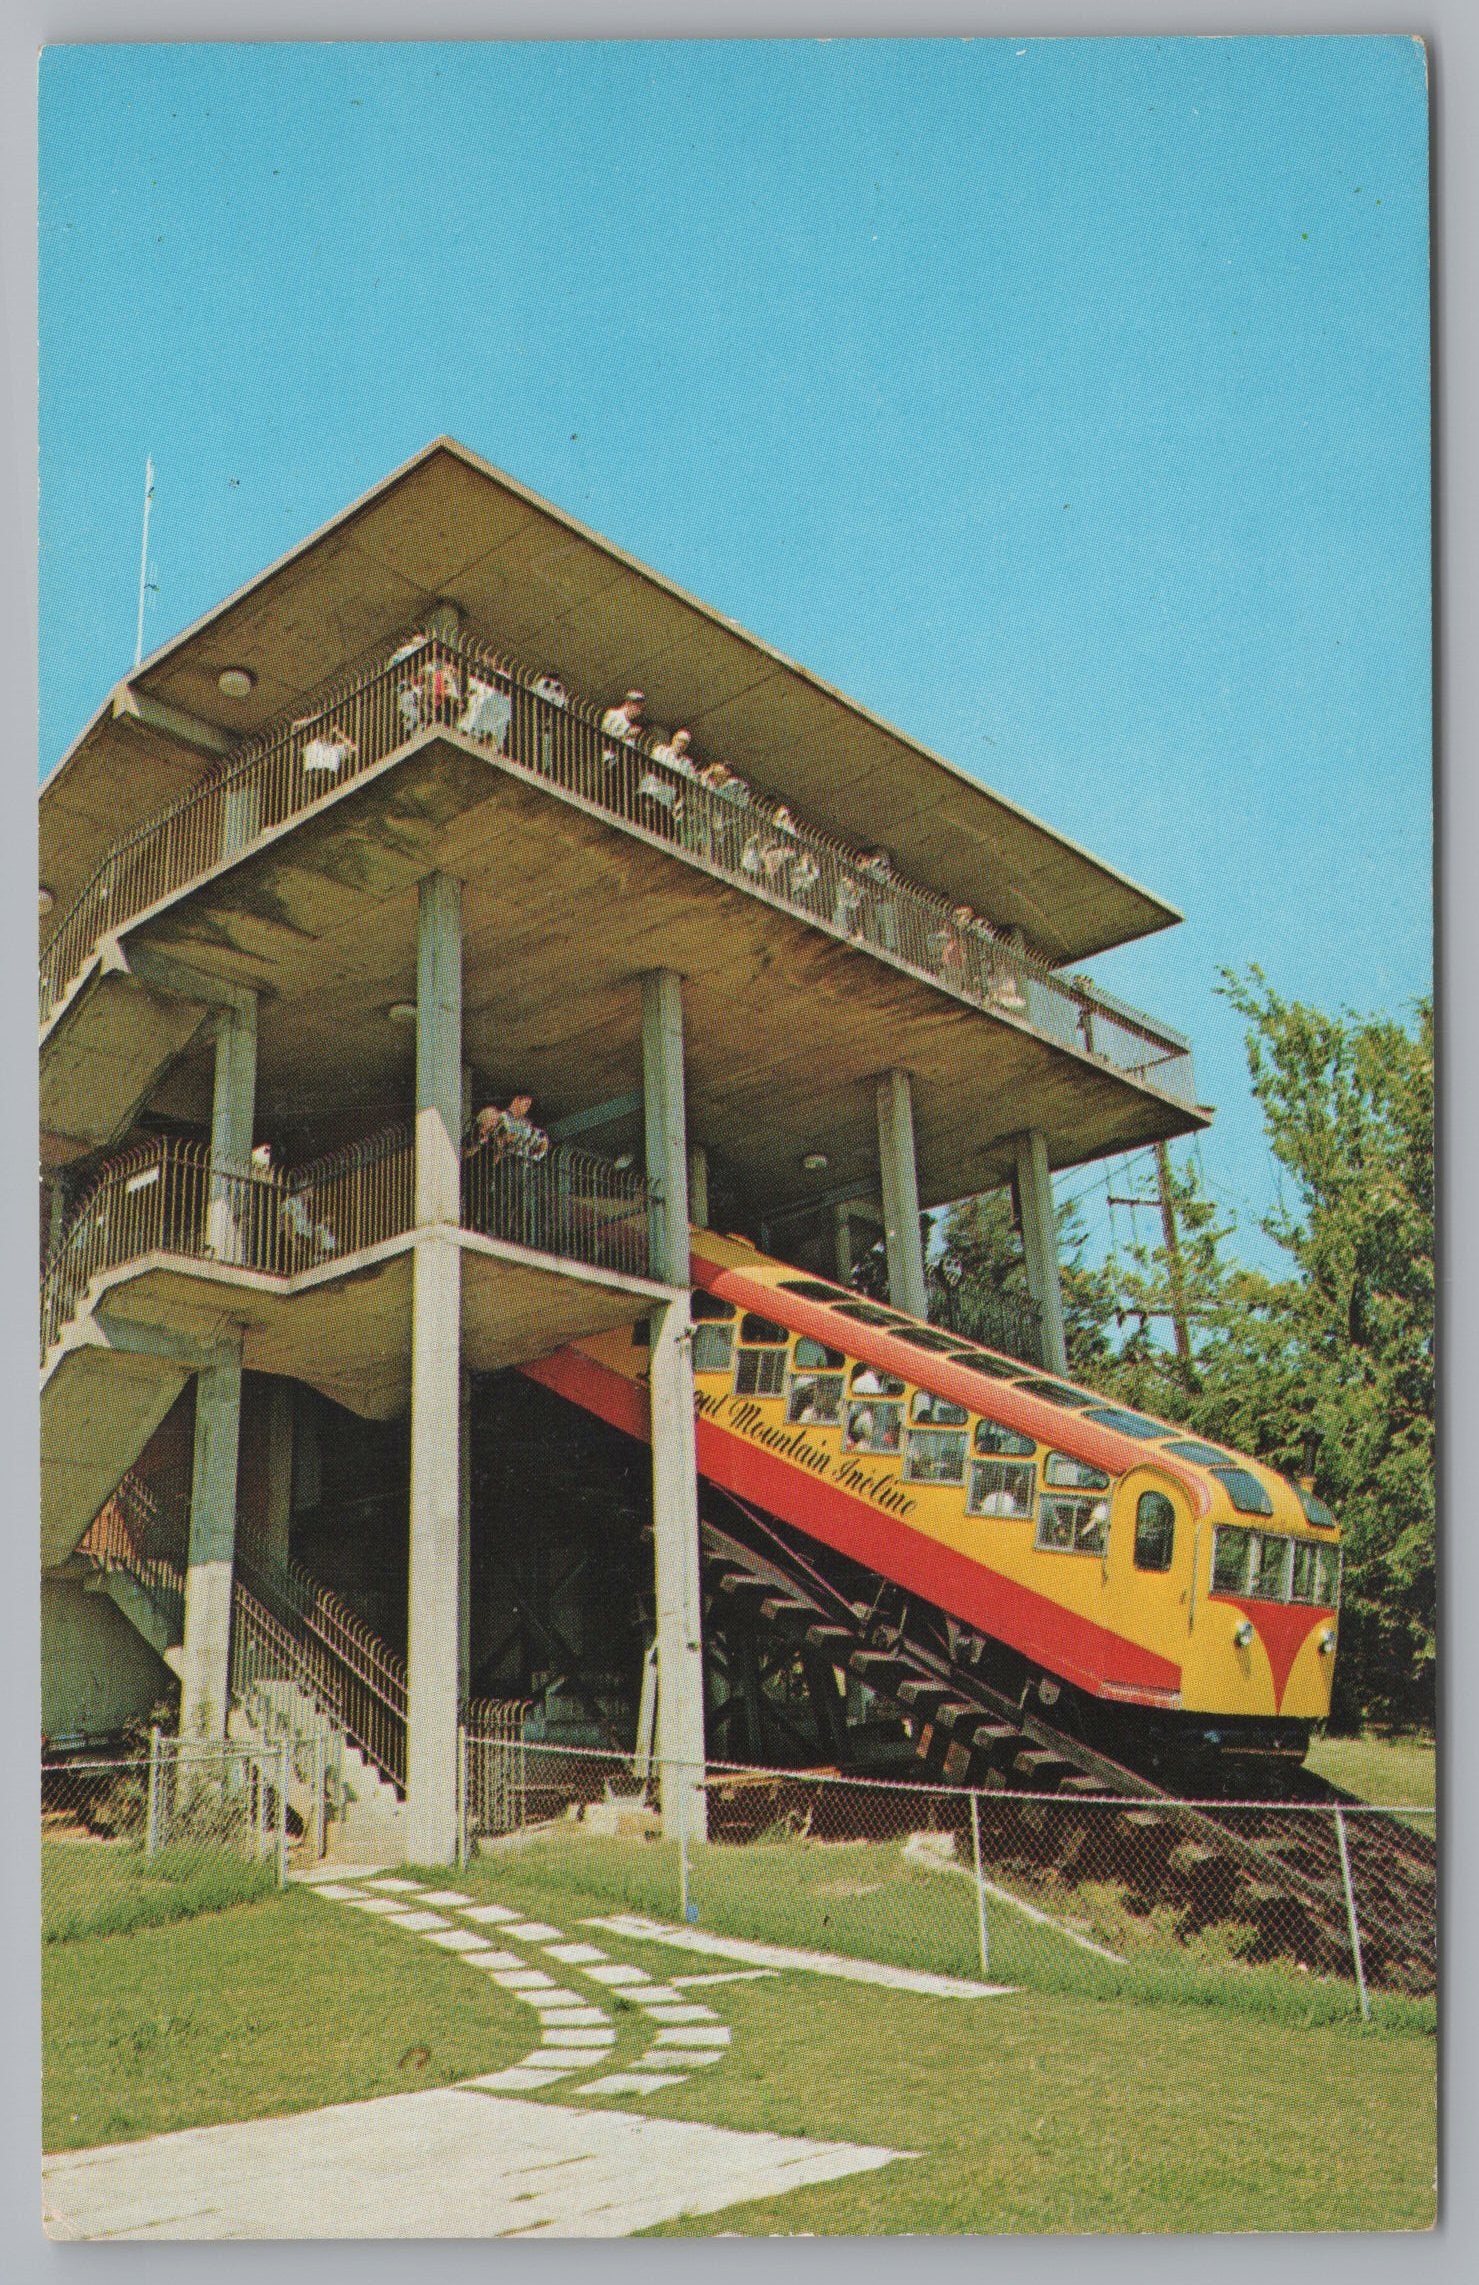 Incline Car, Lookout Mountain, Chattanooga, Tennessee, VTG PC